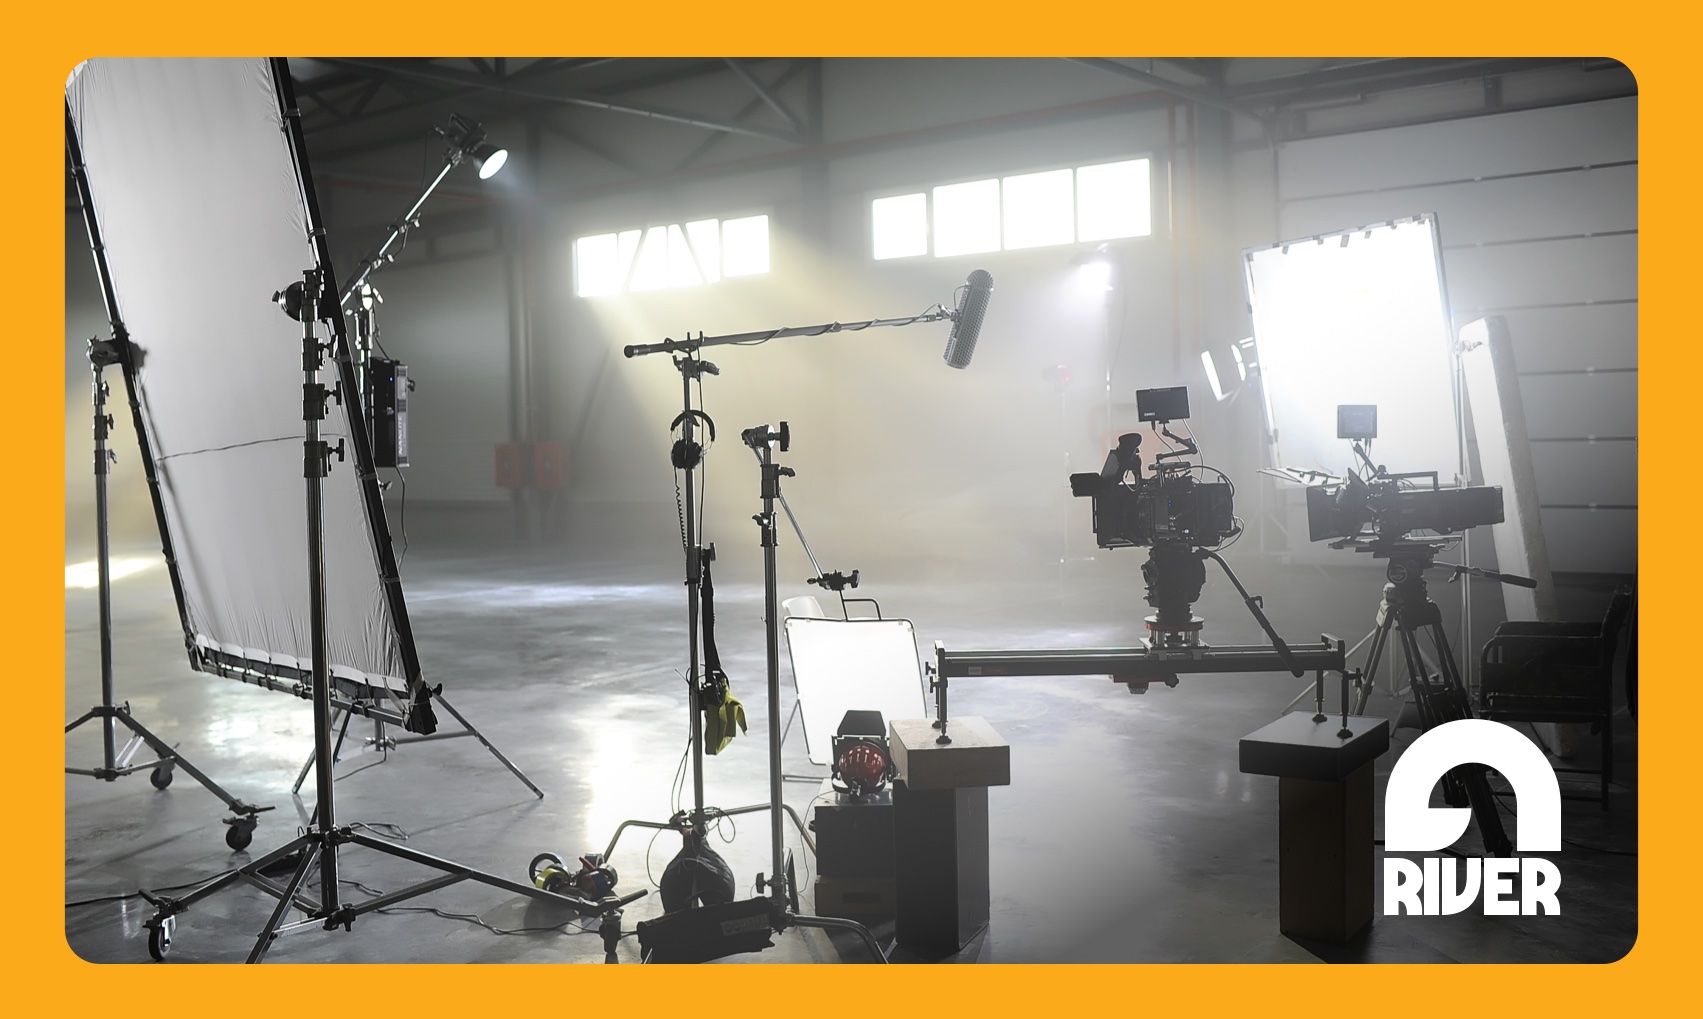 Professional videography equipment and lighting gear inside a professional film studio located in New Hampshire with an orange border on all sides.